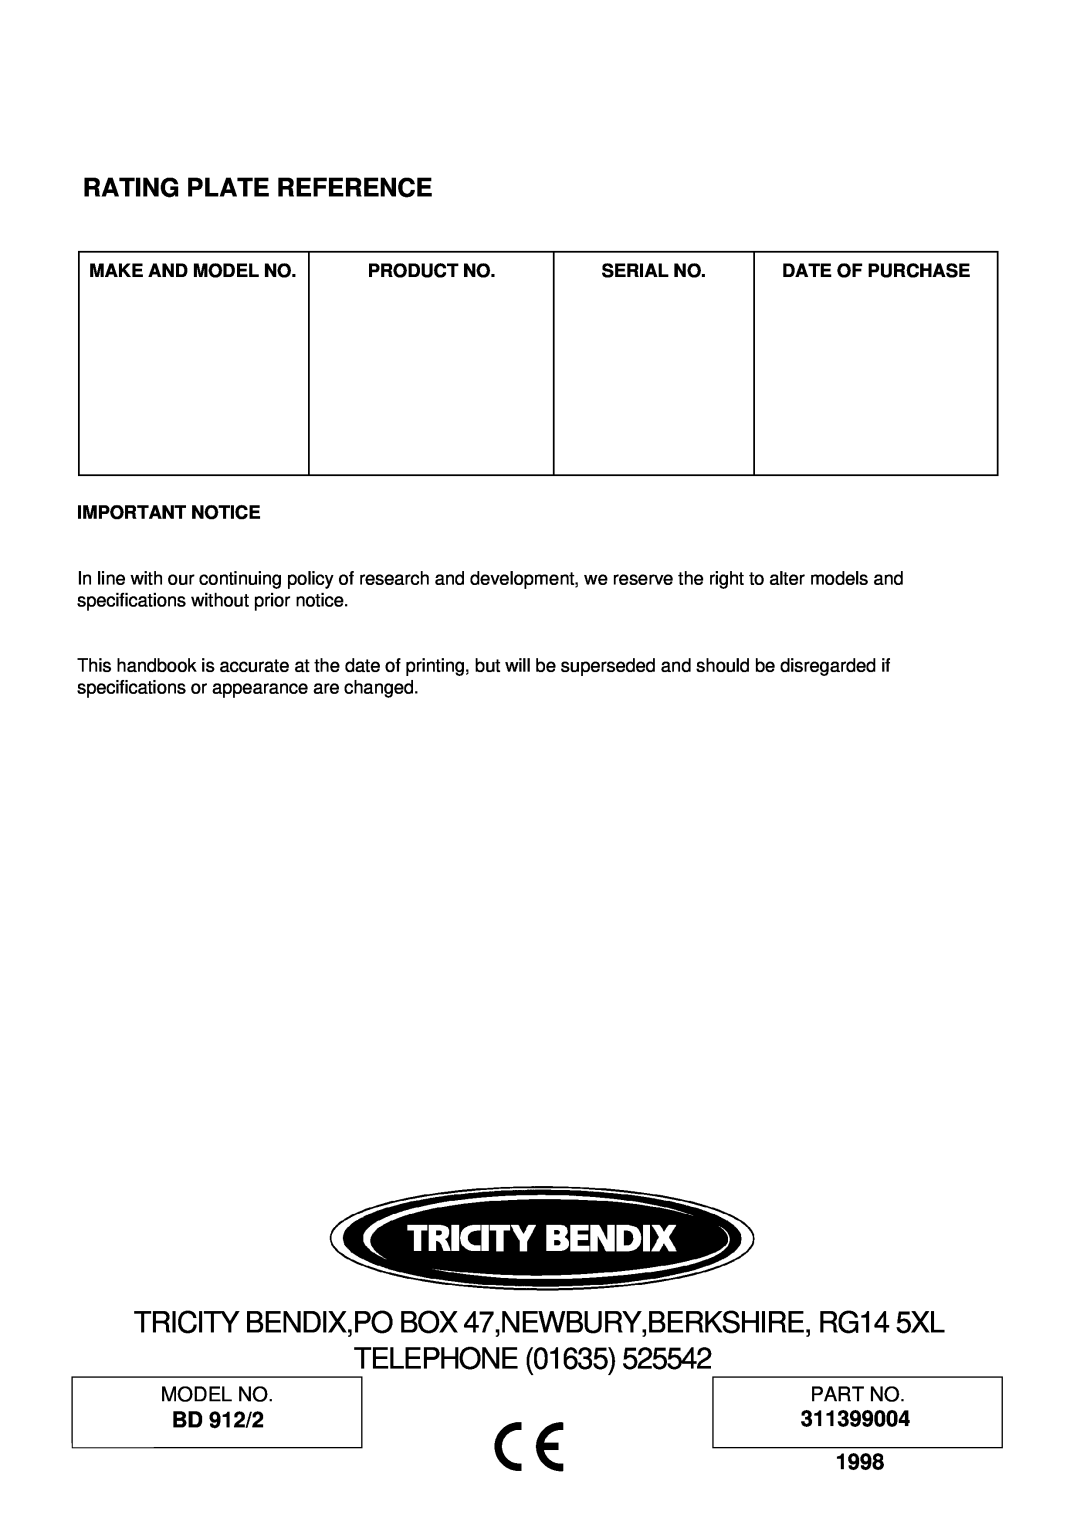 Tricity Bendix BD 912/2 Rating Plate Reference, 311399004, Telephone, Make And Model No, Product No, Serial No 